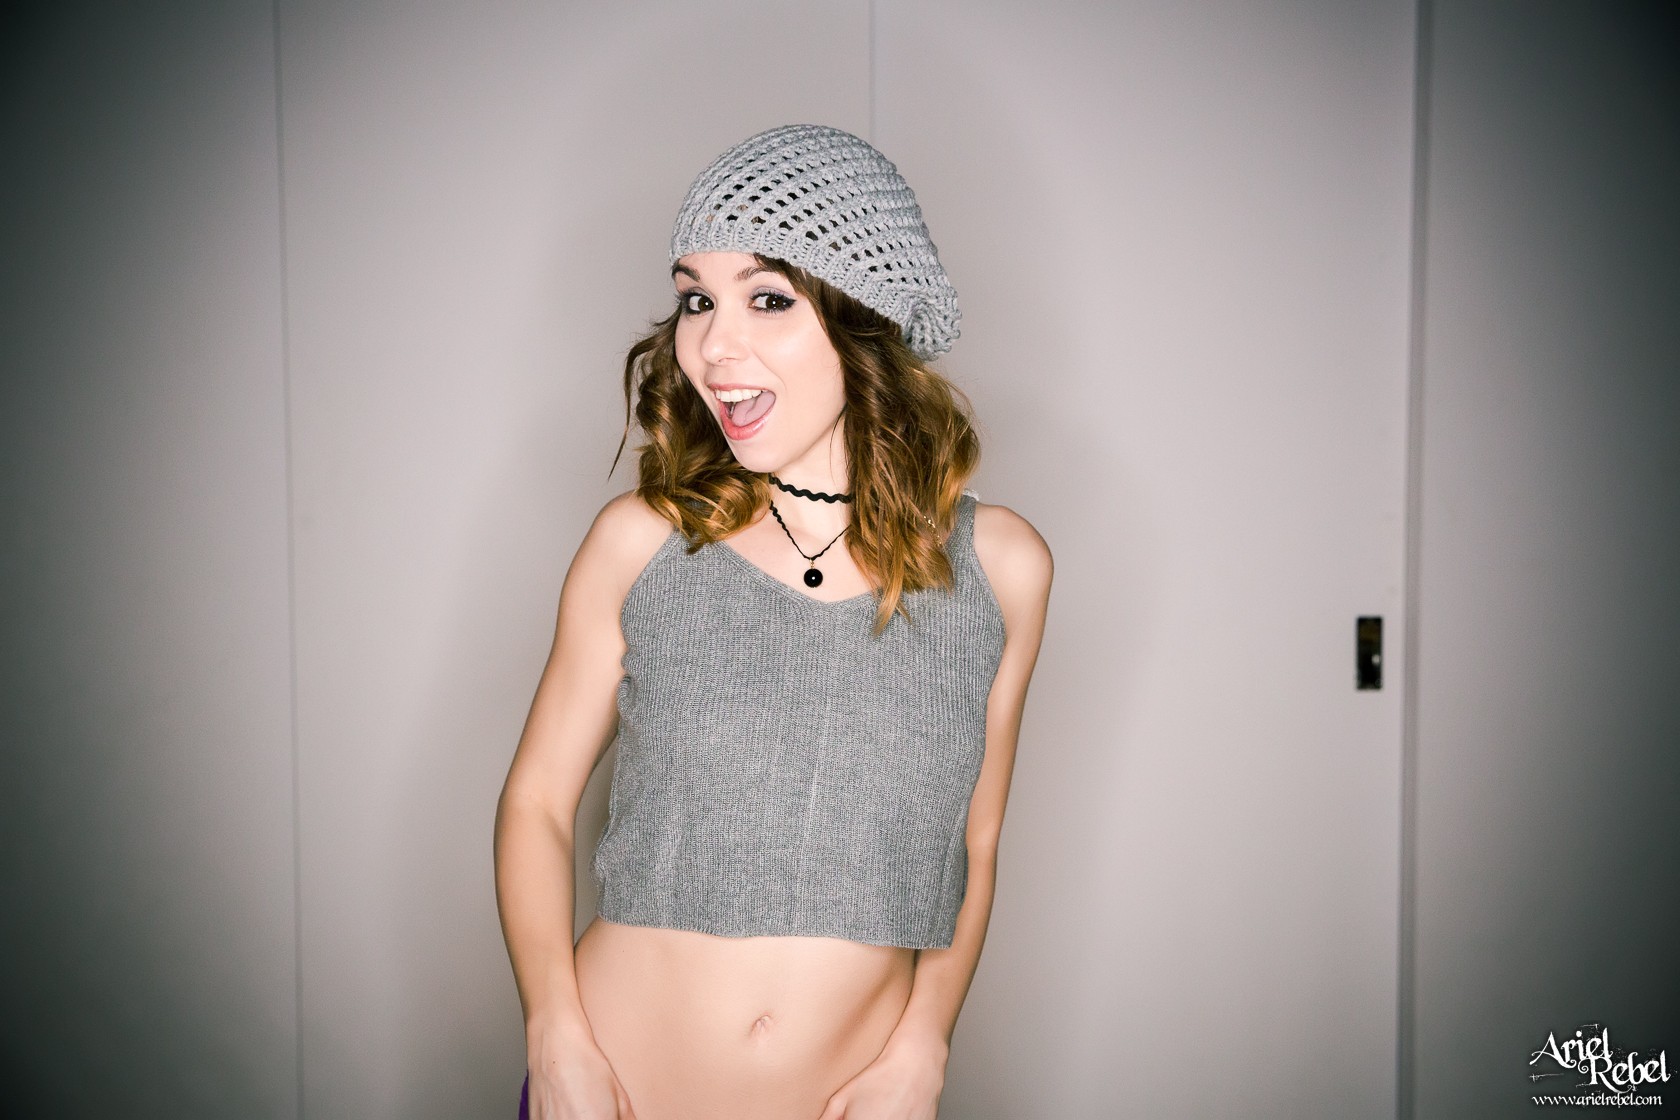 Women Model Long Hair Necklace Young Woman Smiling Beanie Crop Top Indoors 1680x1120